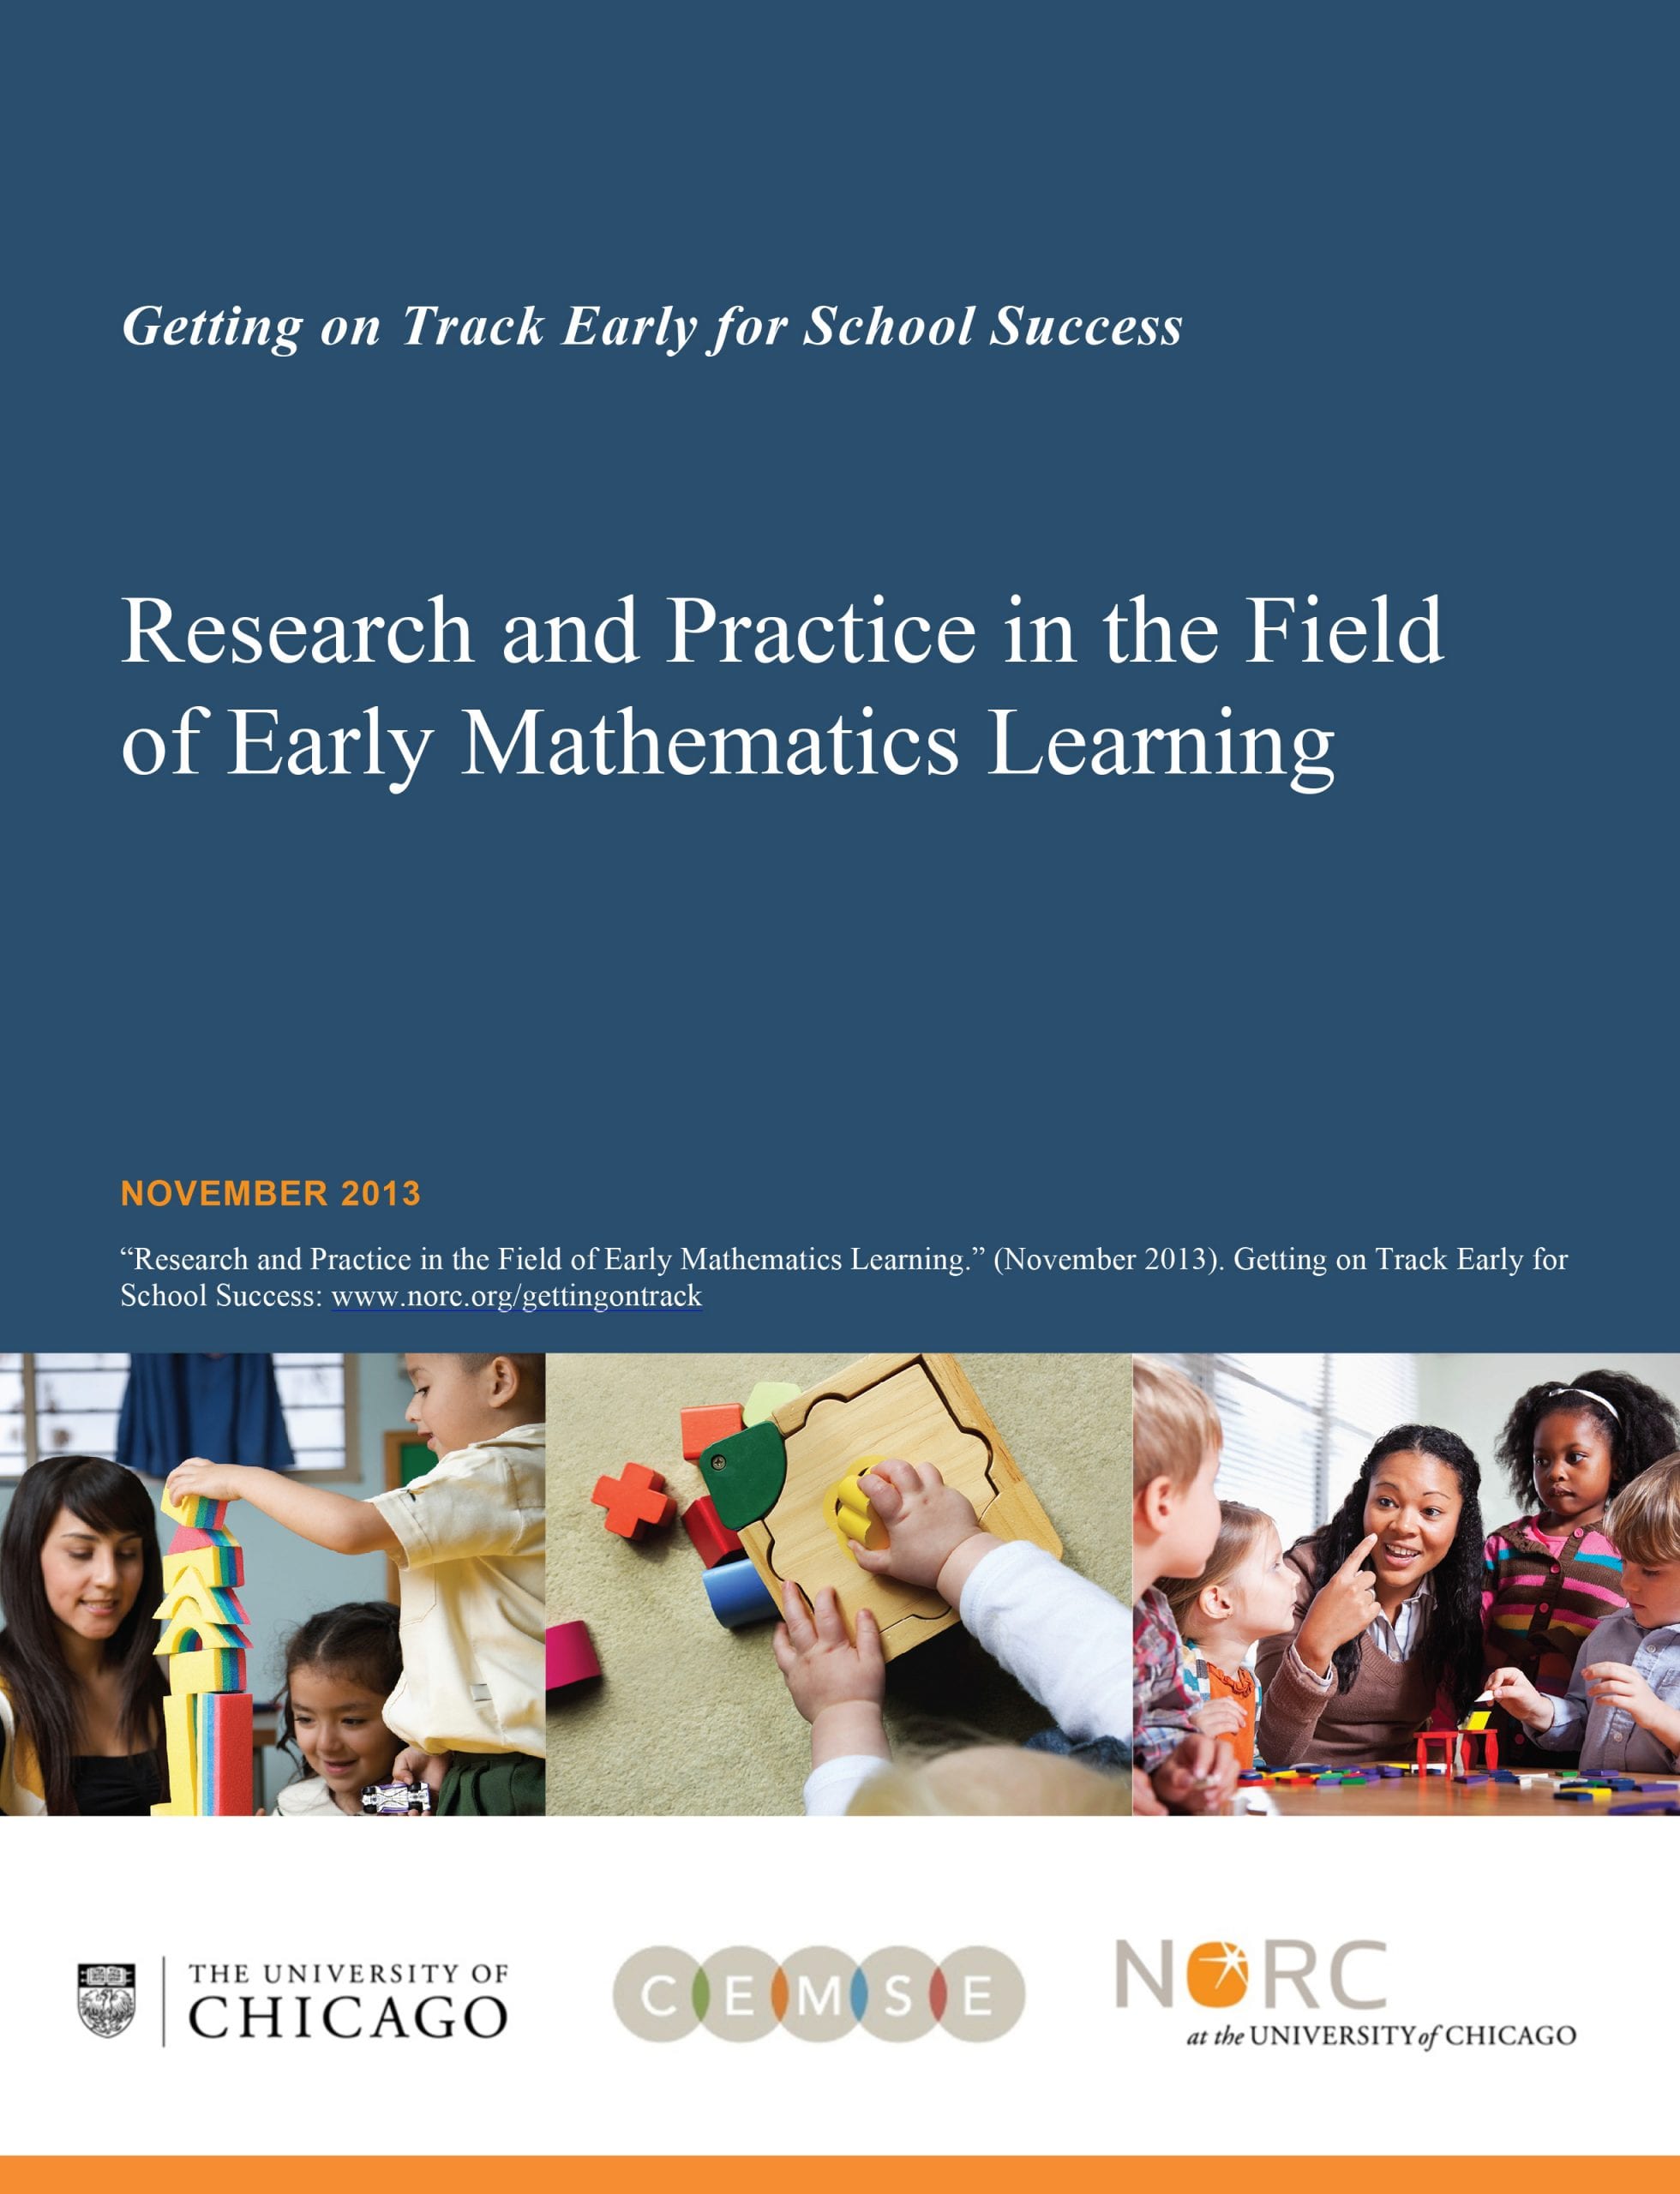 Research and Practice in the Field of Early Mathematics Learning